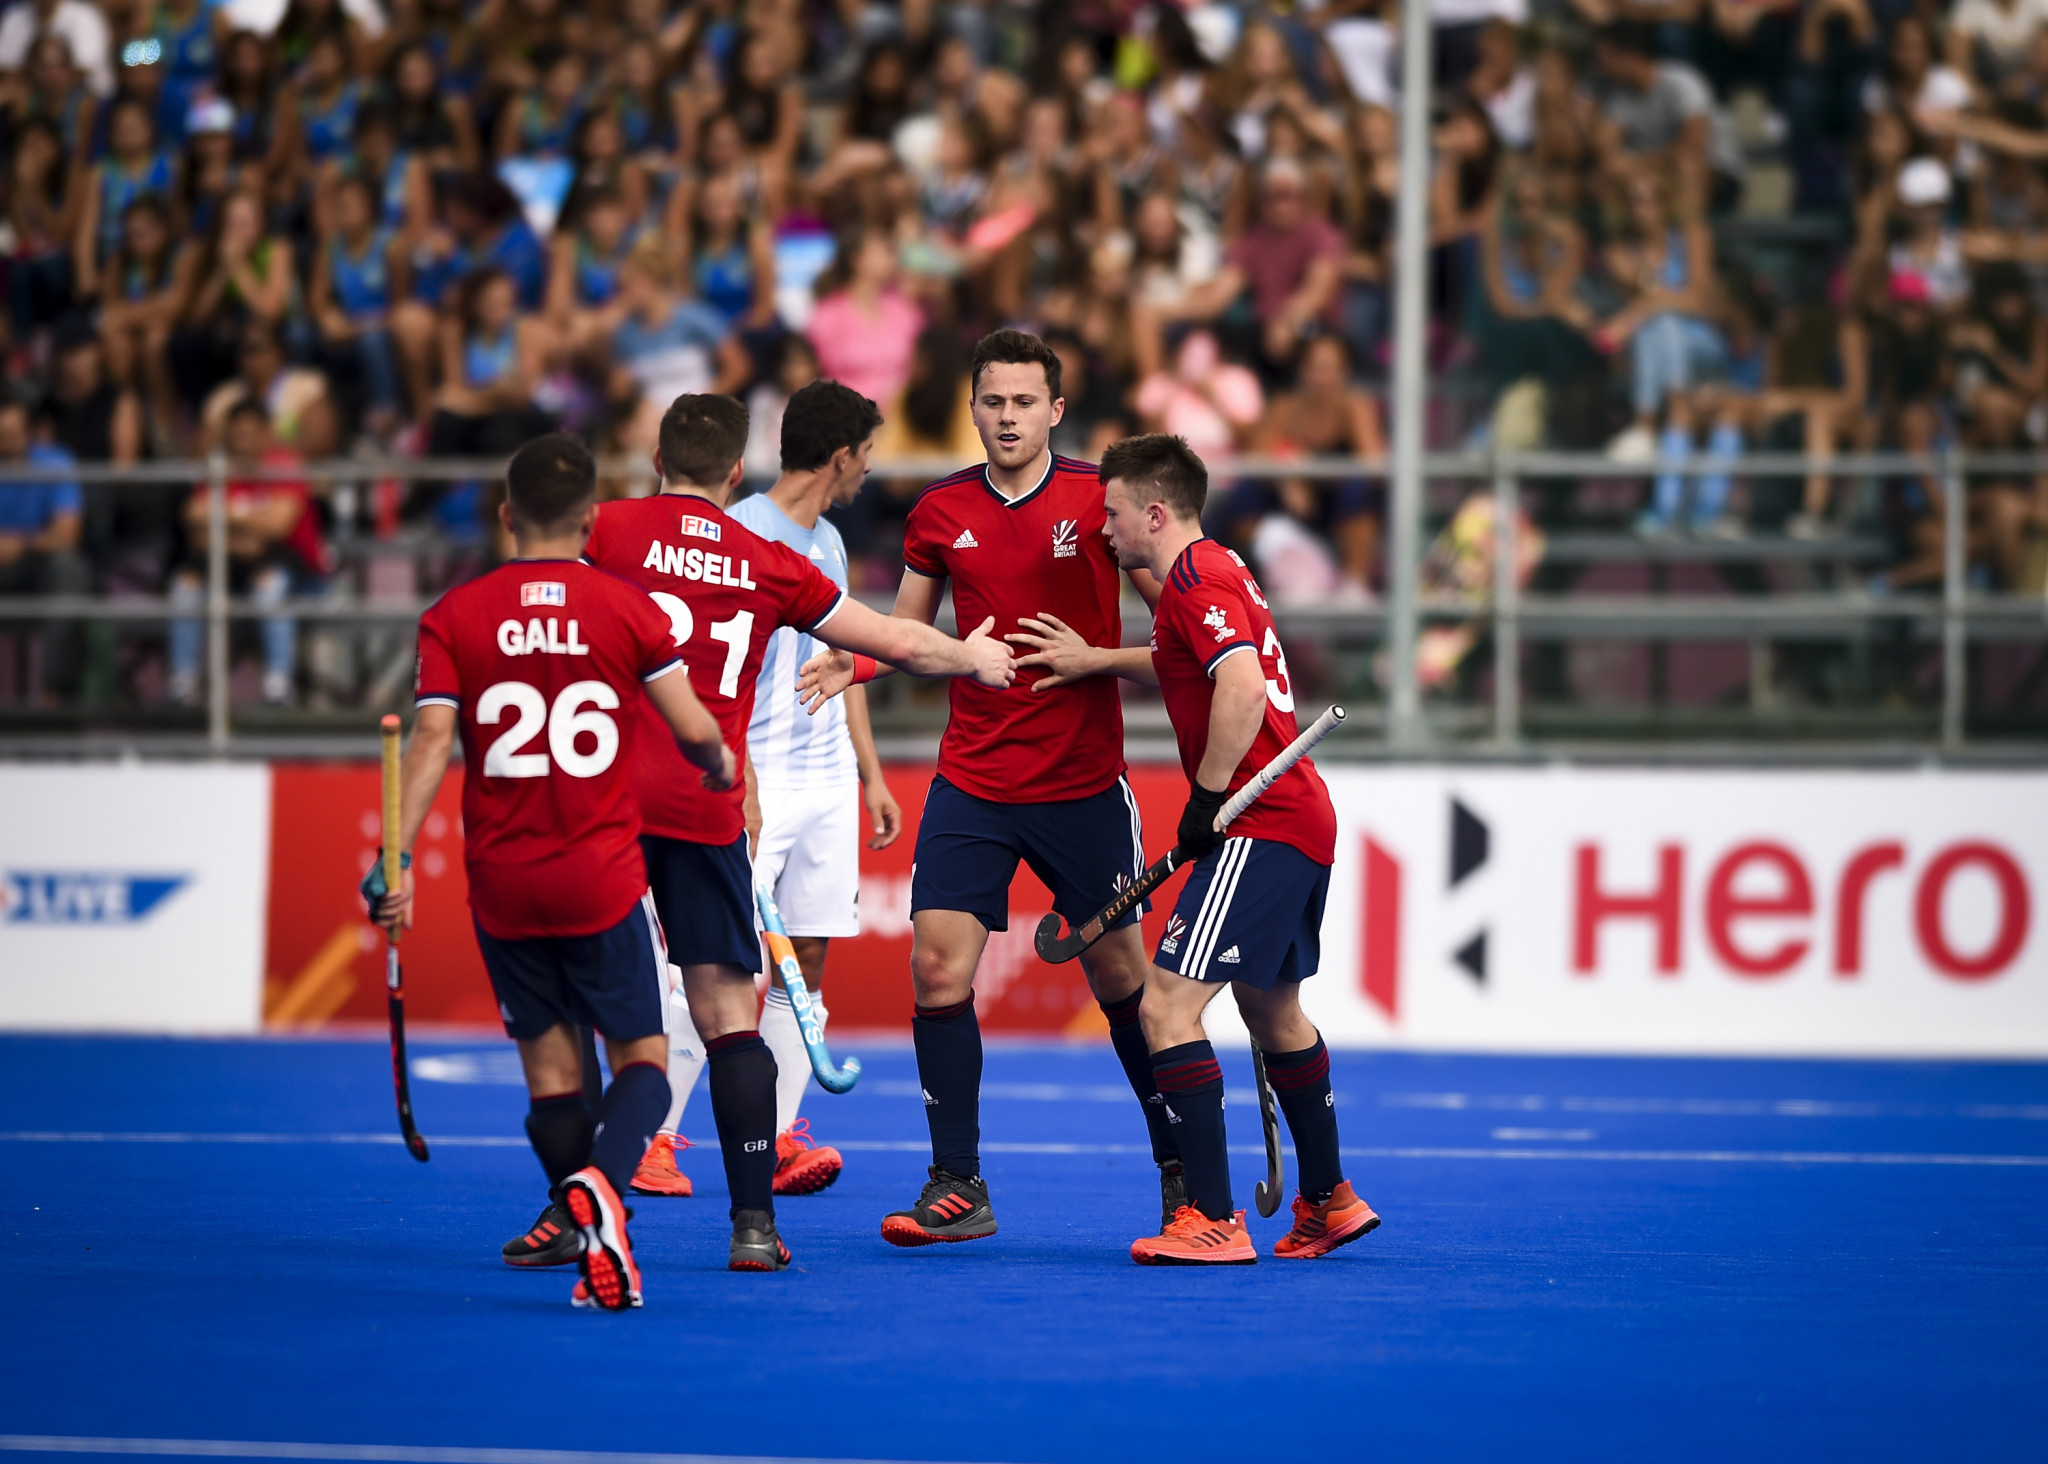 Both Olympic champions lose as Argentina host Great Britain in FIH Pro League